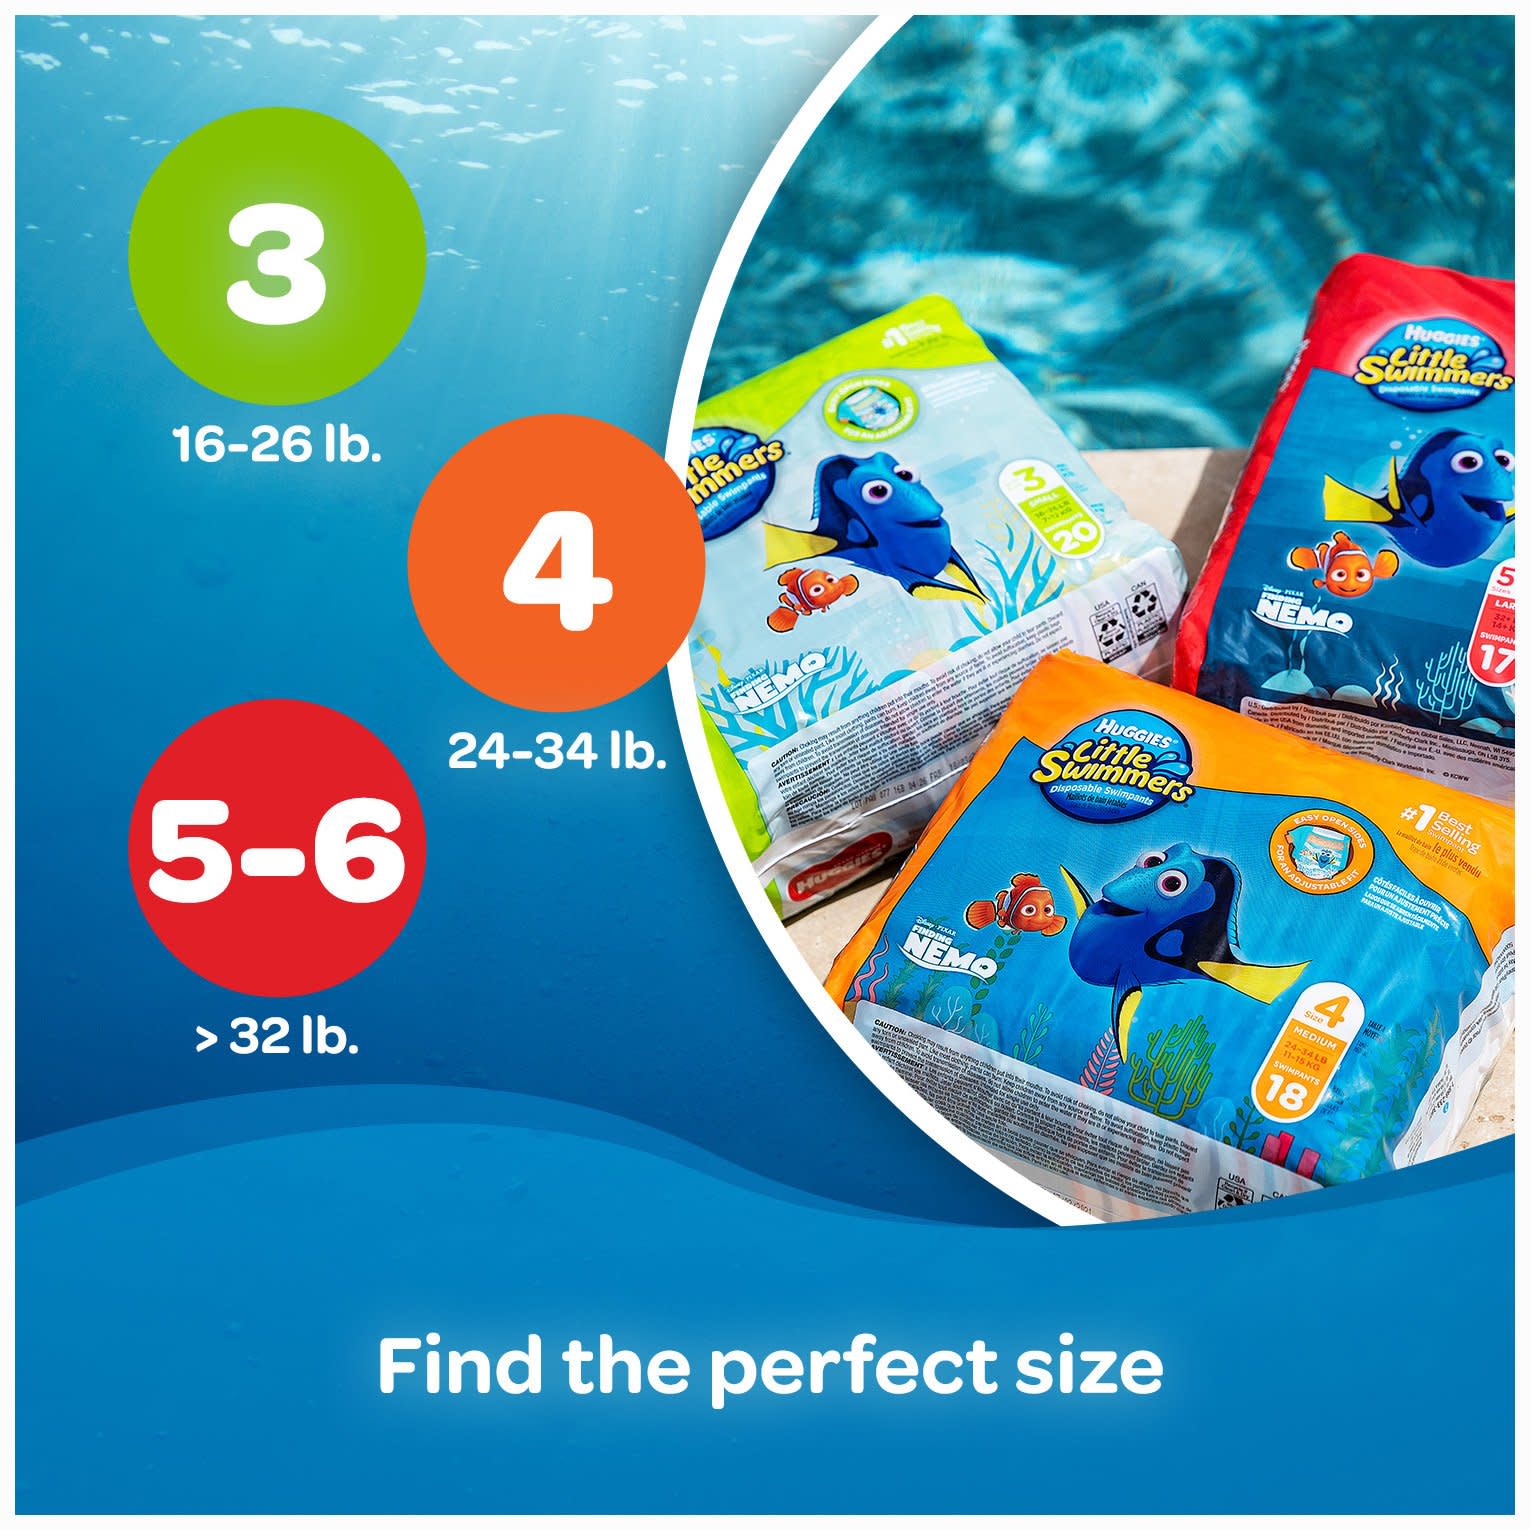 Huggies Little Swimmers Swim Diapers, Size 5-6 Large, 17 Ct - image 3 of 8